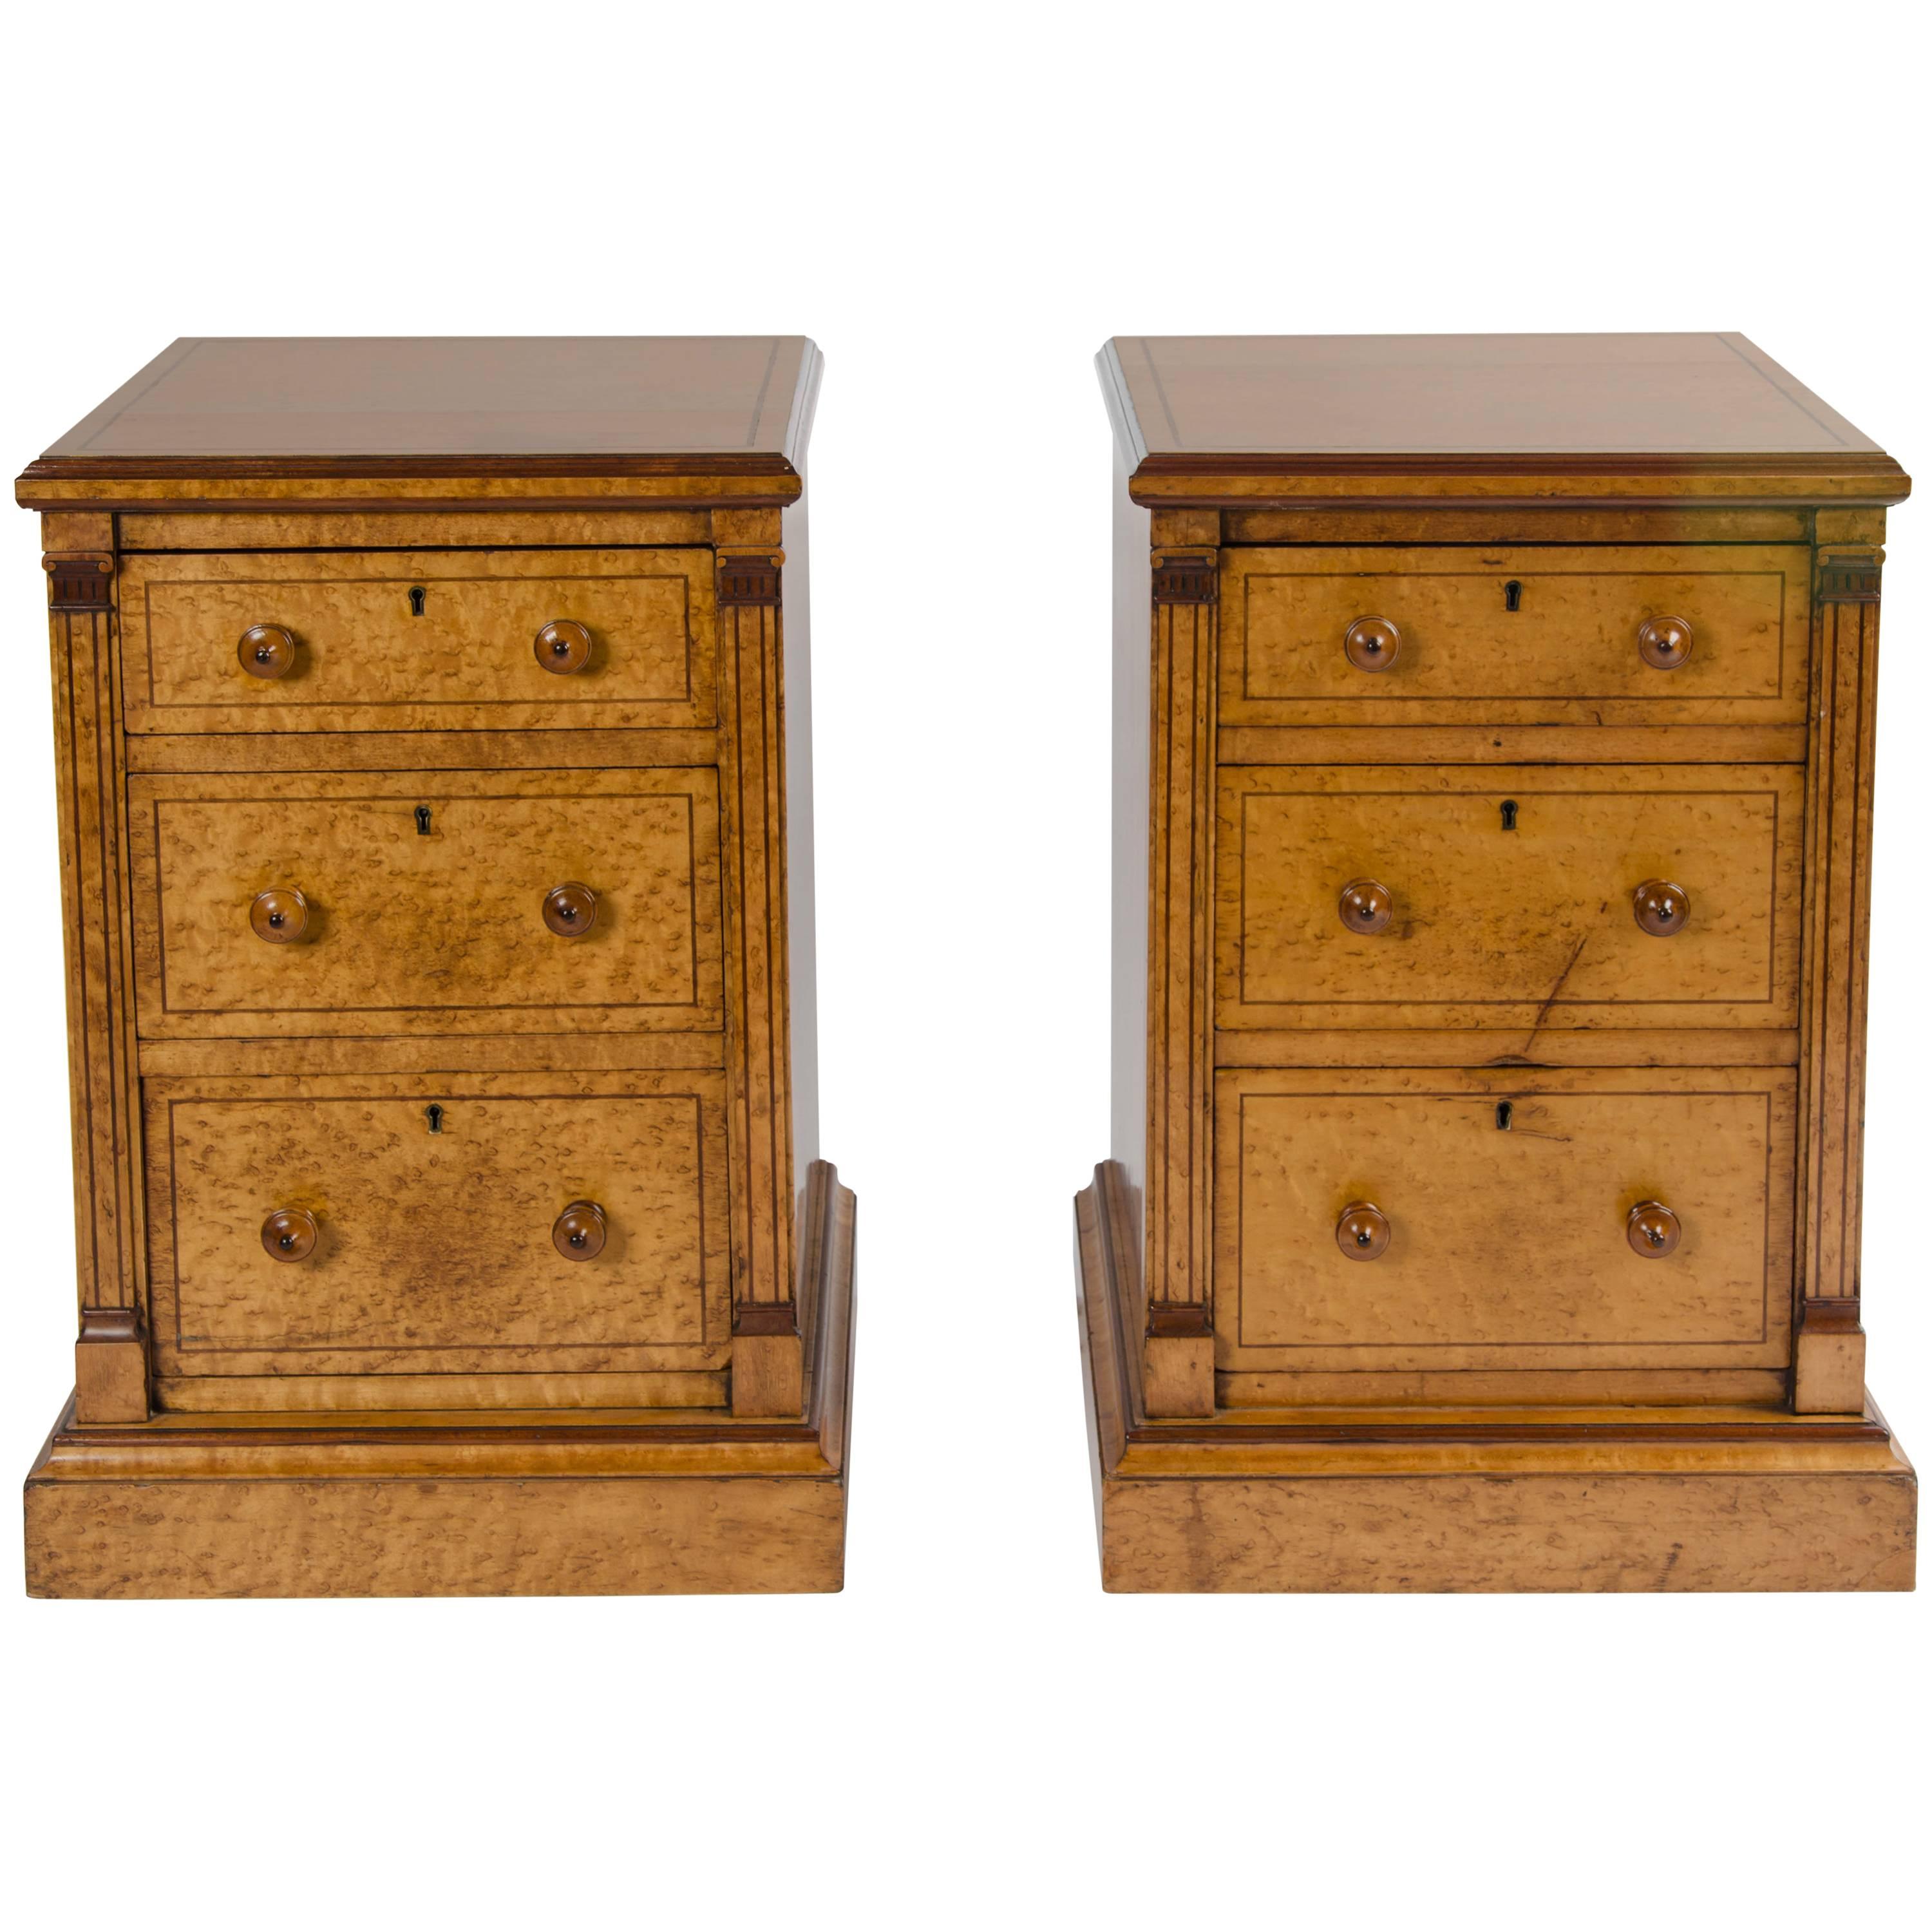 Pair of 19th Century Bird's-Eye Maple Bedside Chests